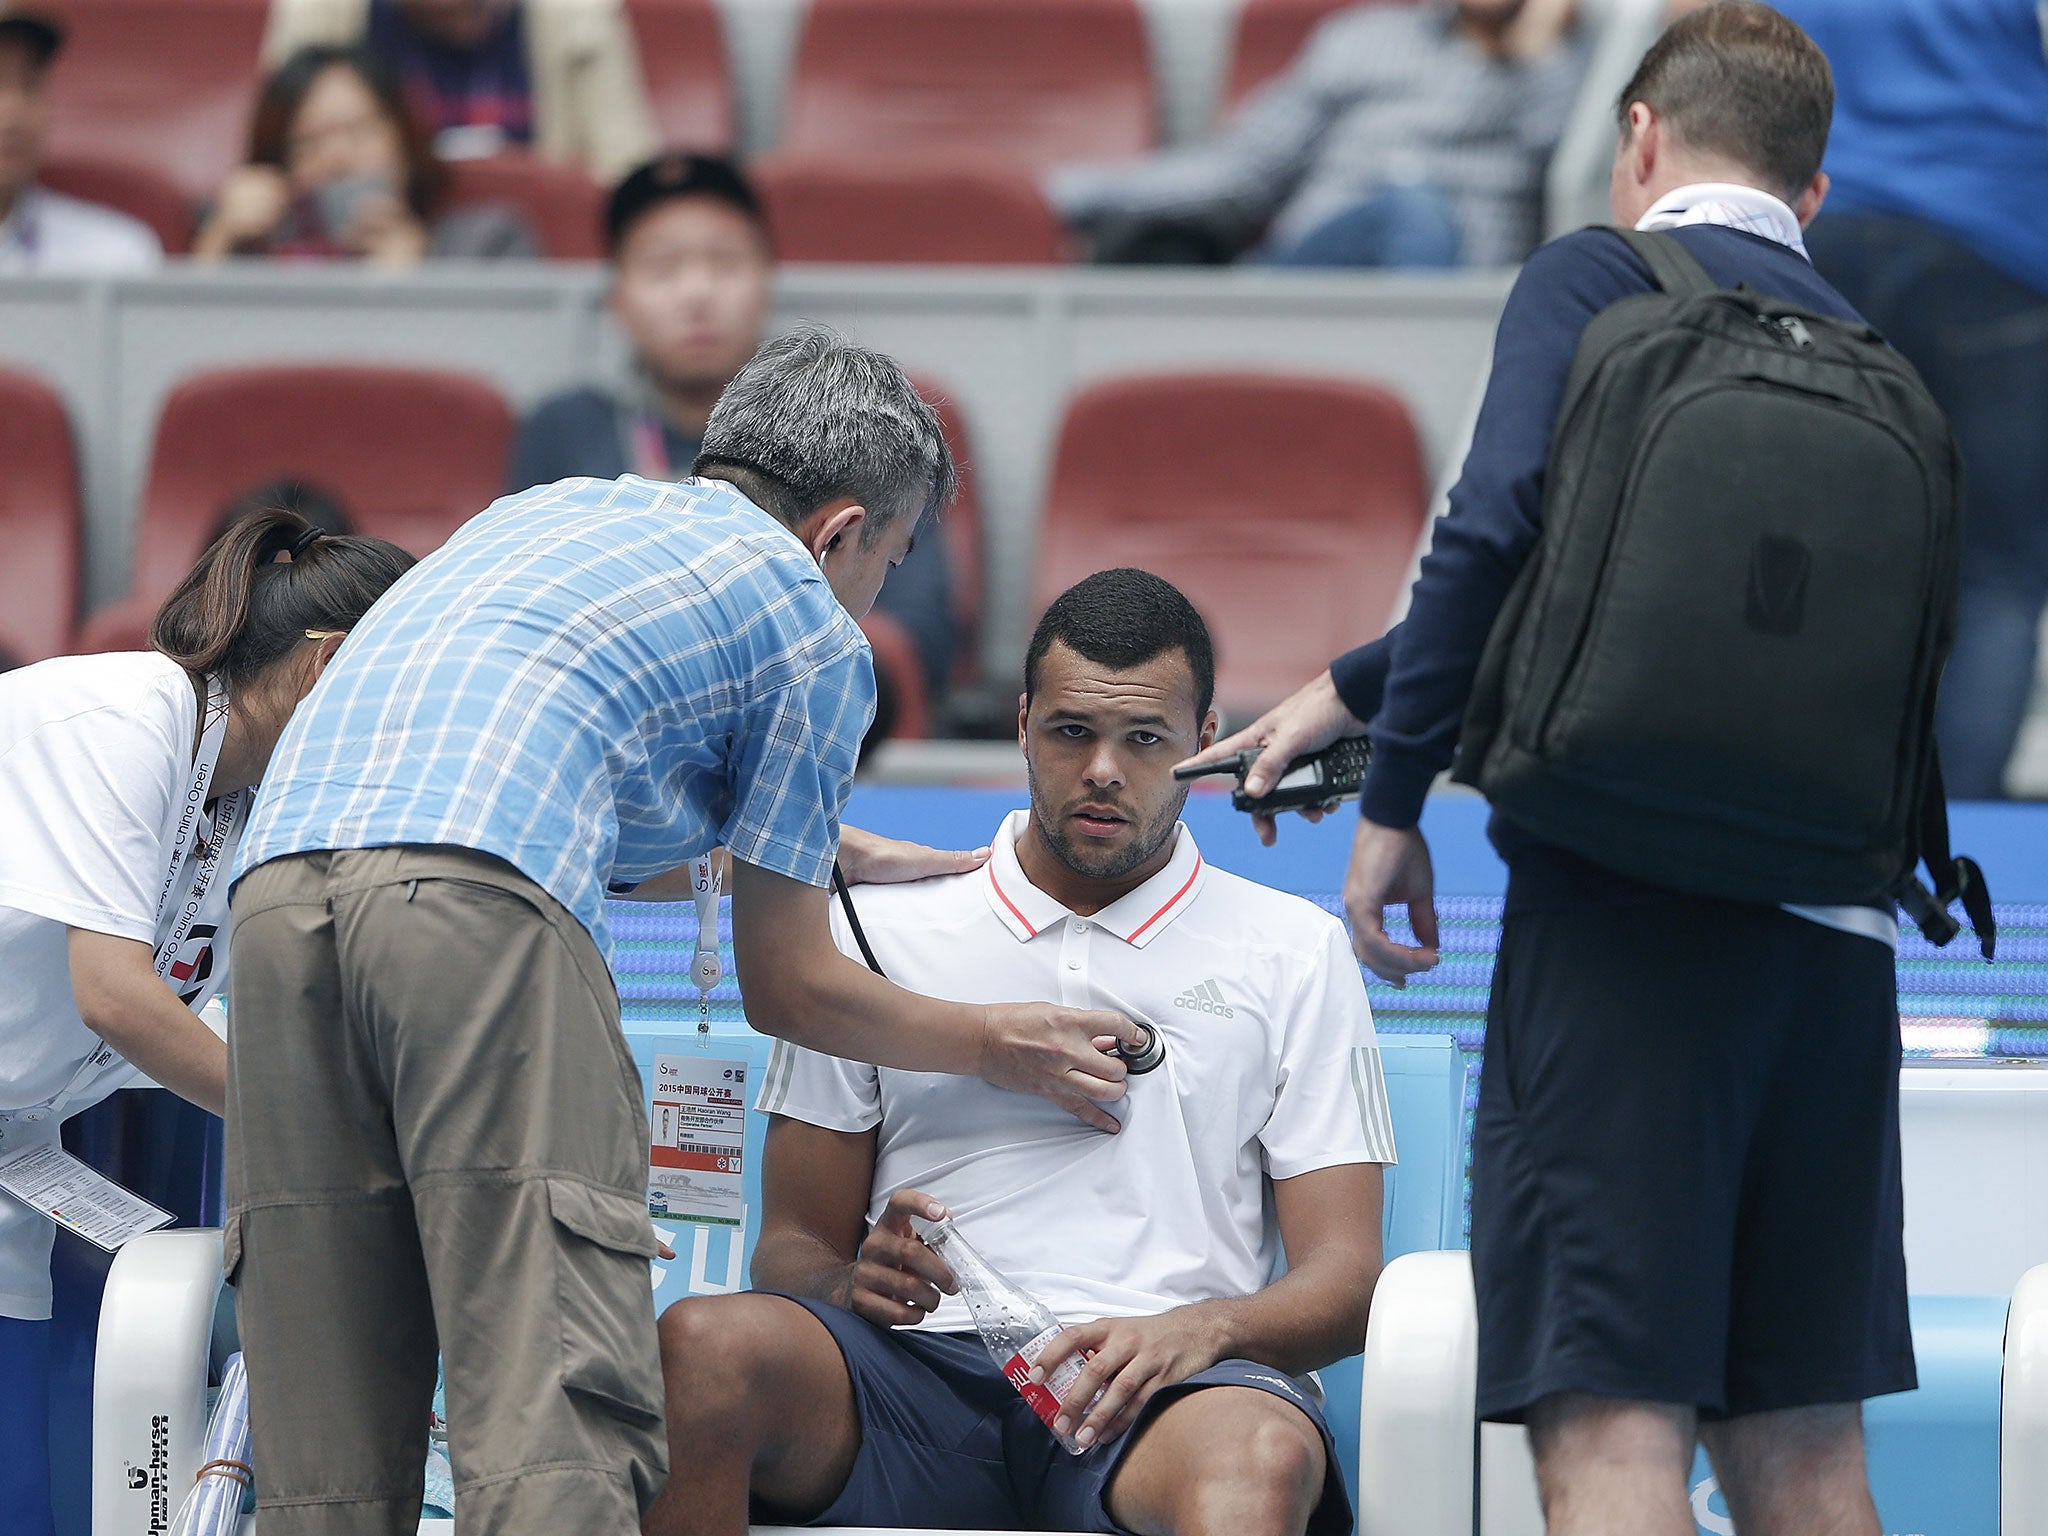 Jo-Wilfried Tsonga is given treatment at the China Open